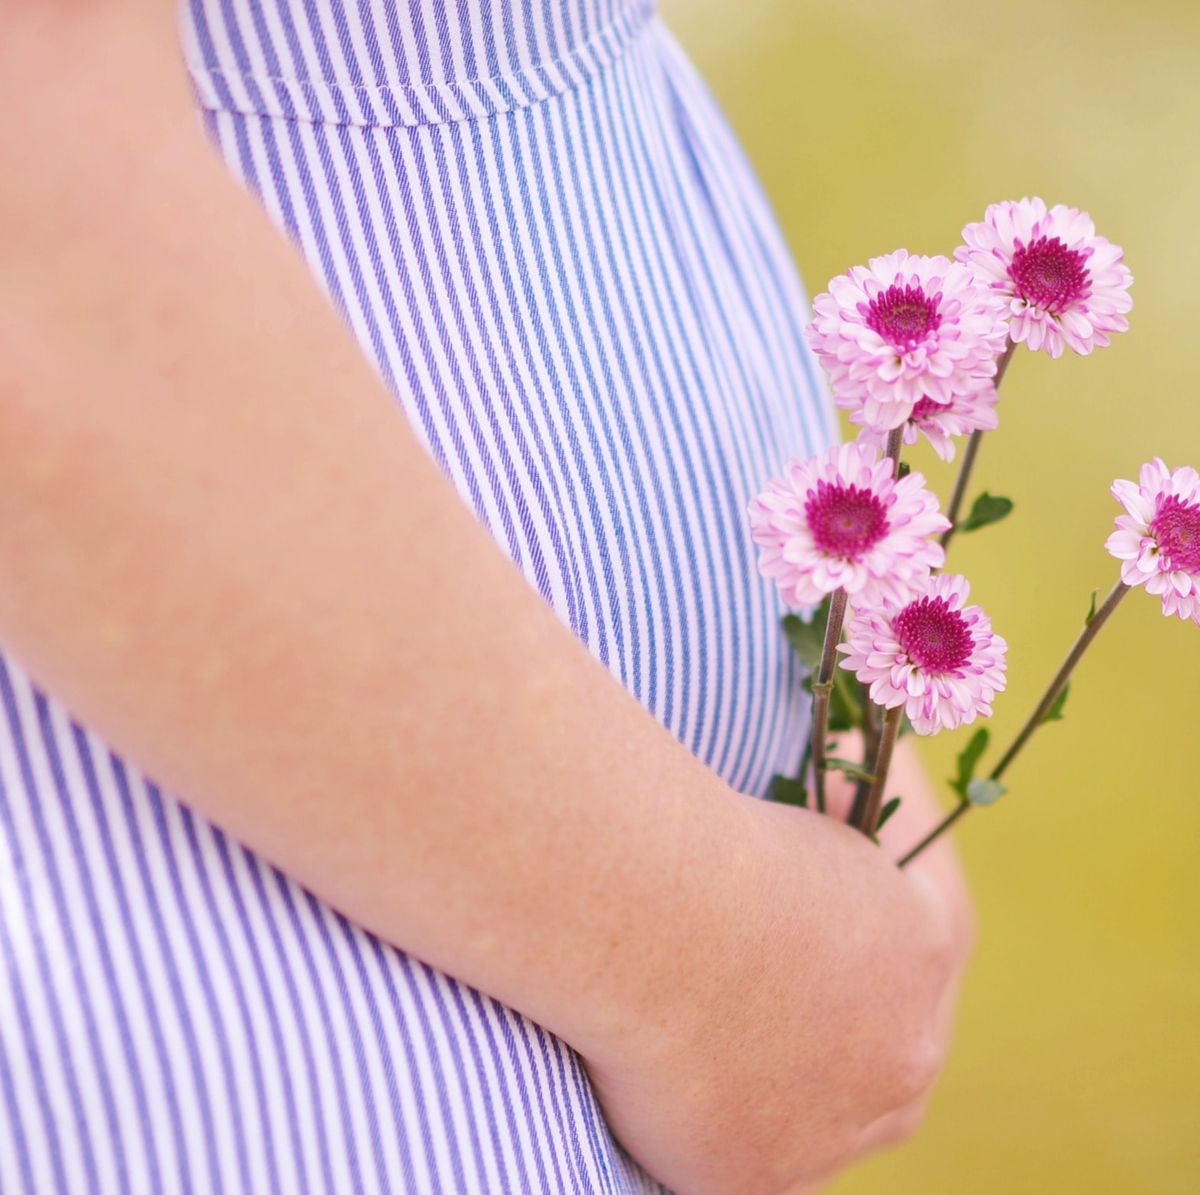 Pain and pregnancy discharge: when to seek help